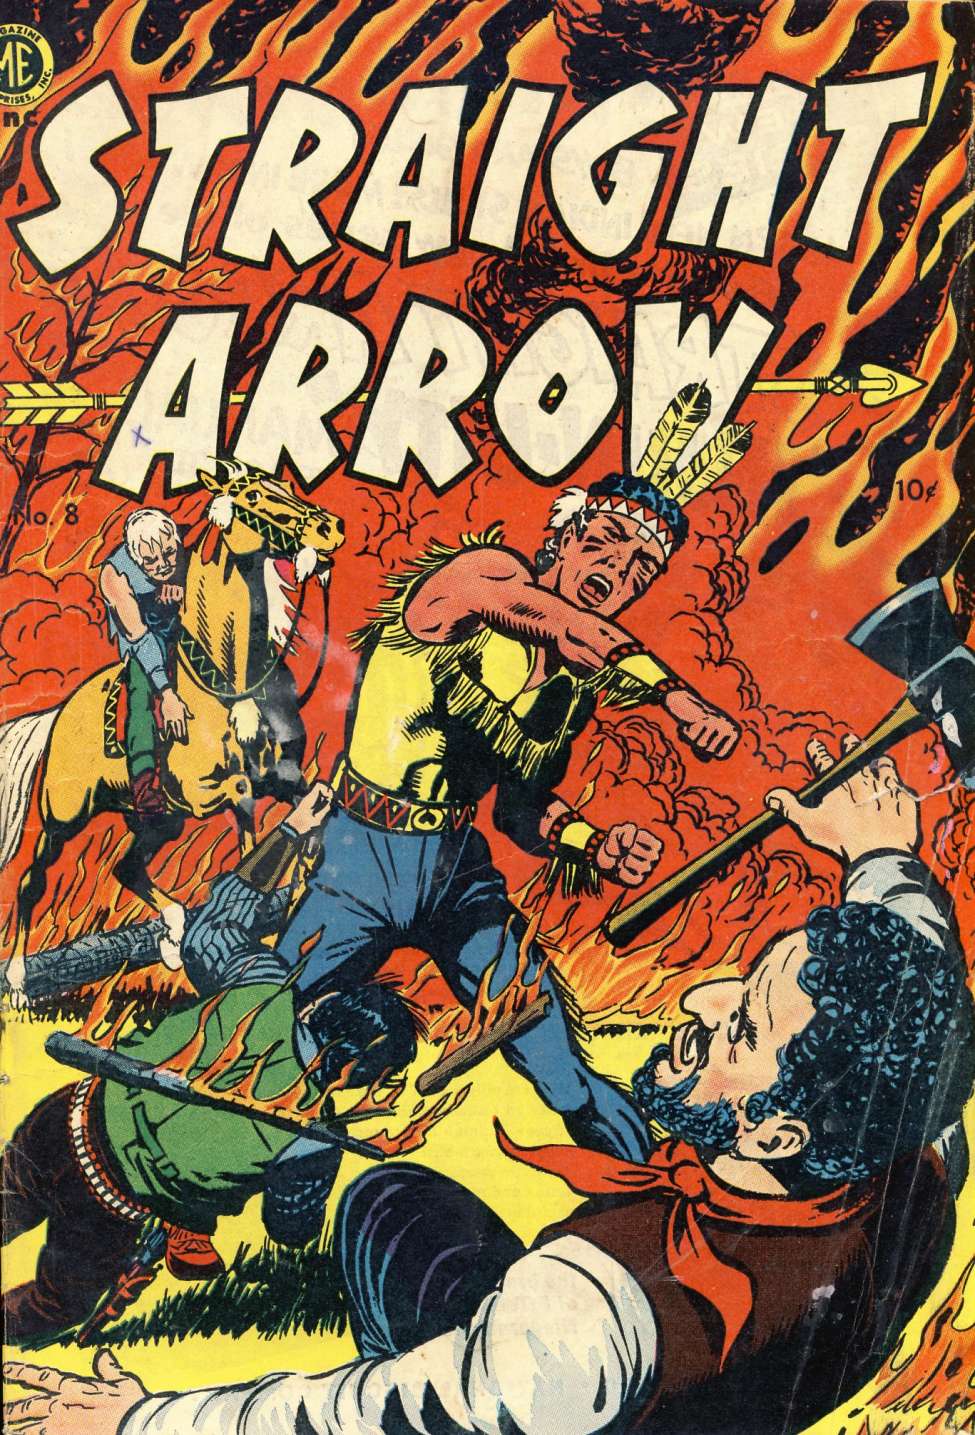 Book Cover For Straight Arrow 8